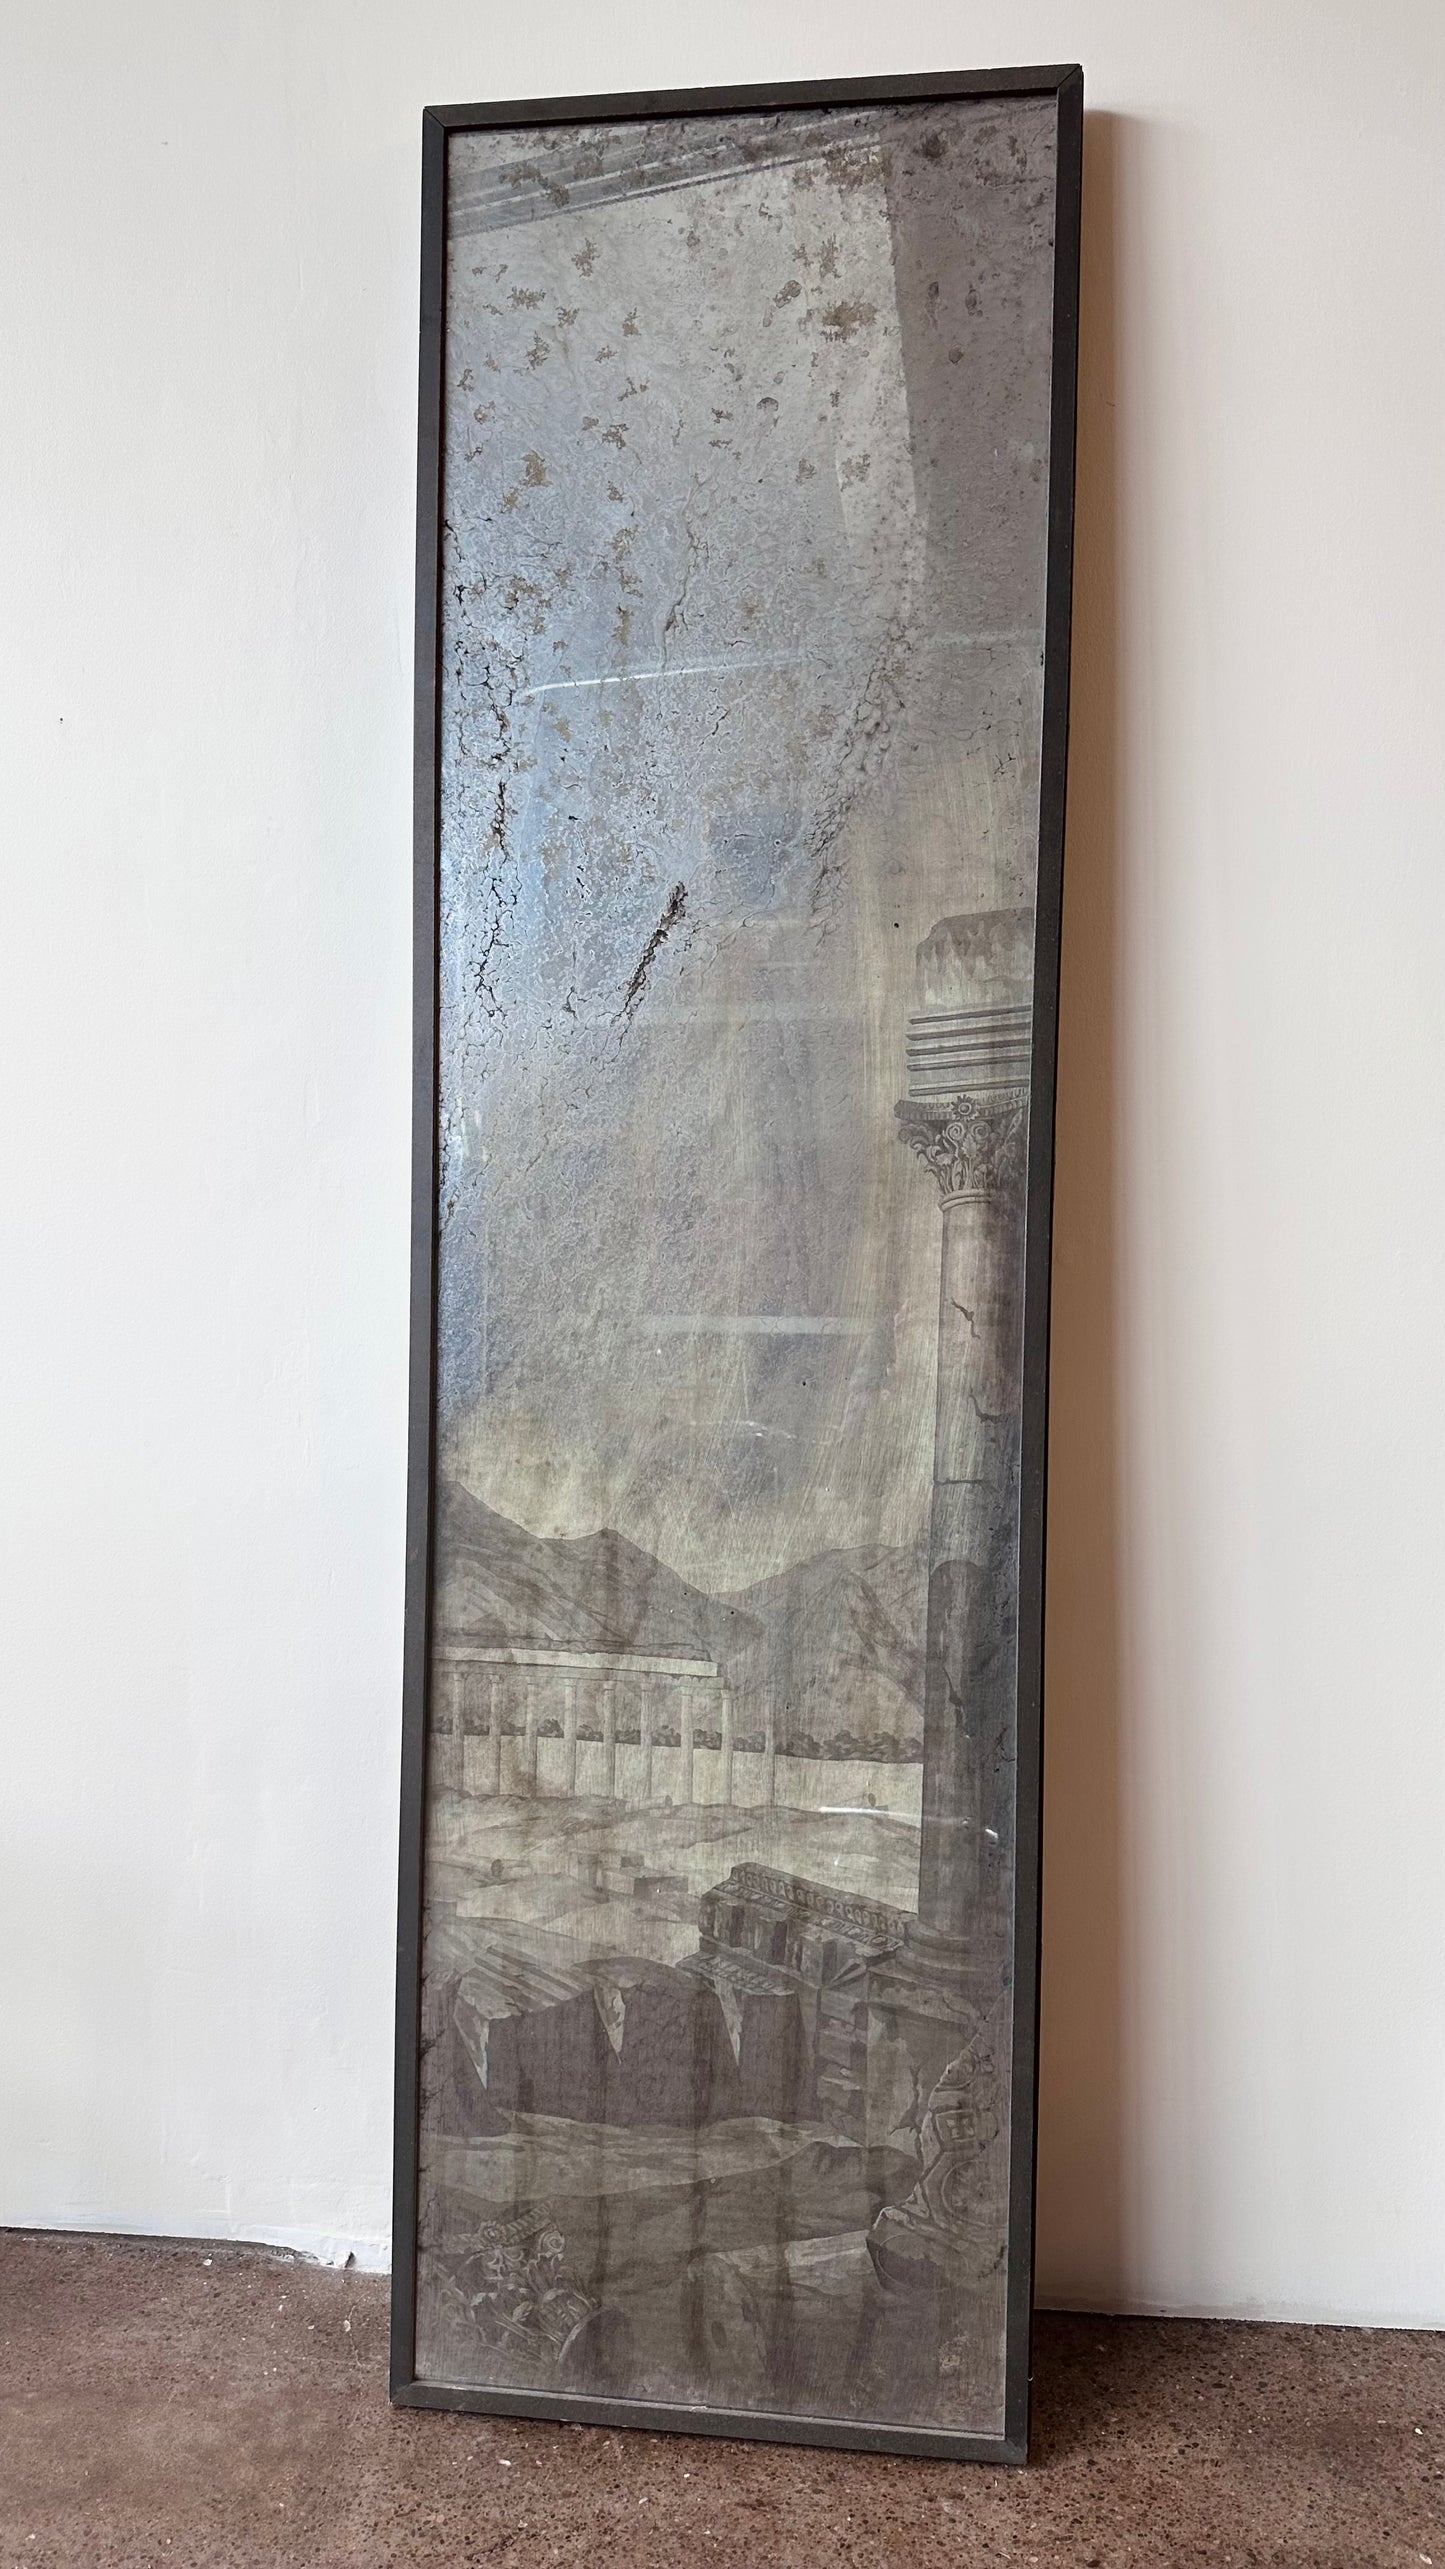 LONG ANTIQUED MIRROR WITH ROMANESQUE SCENE